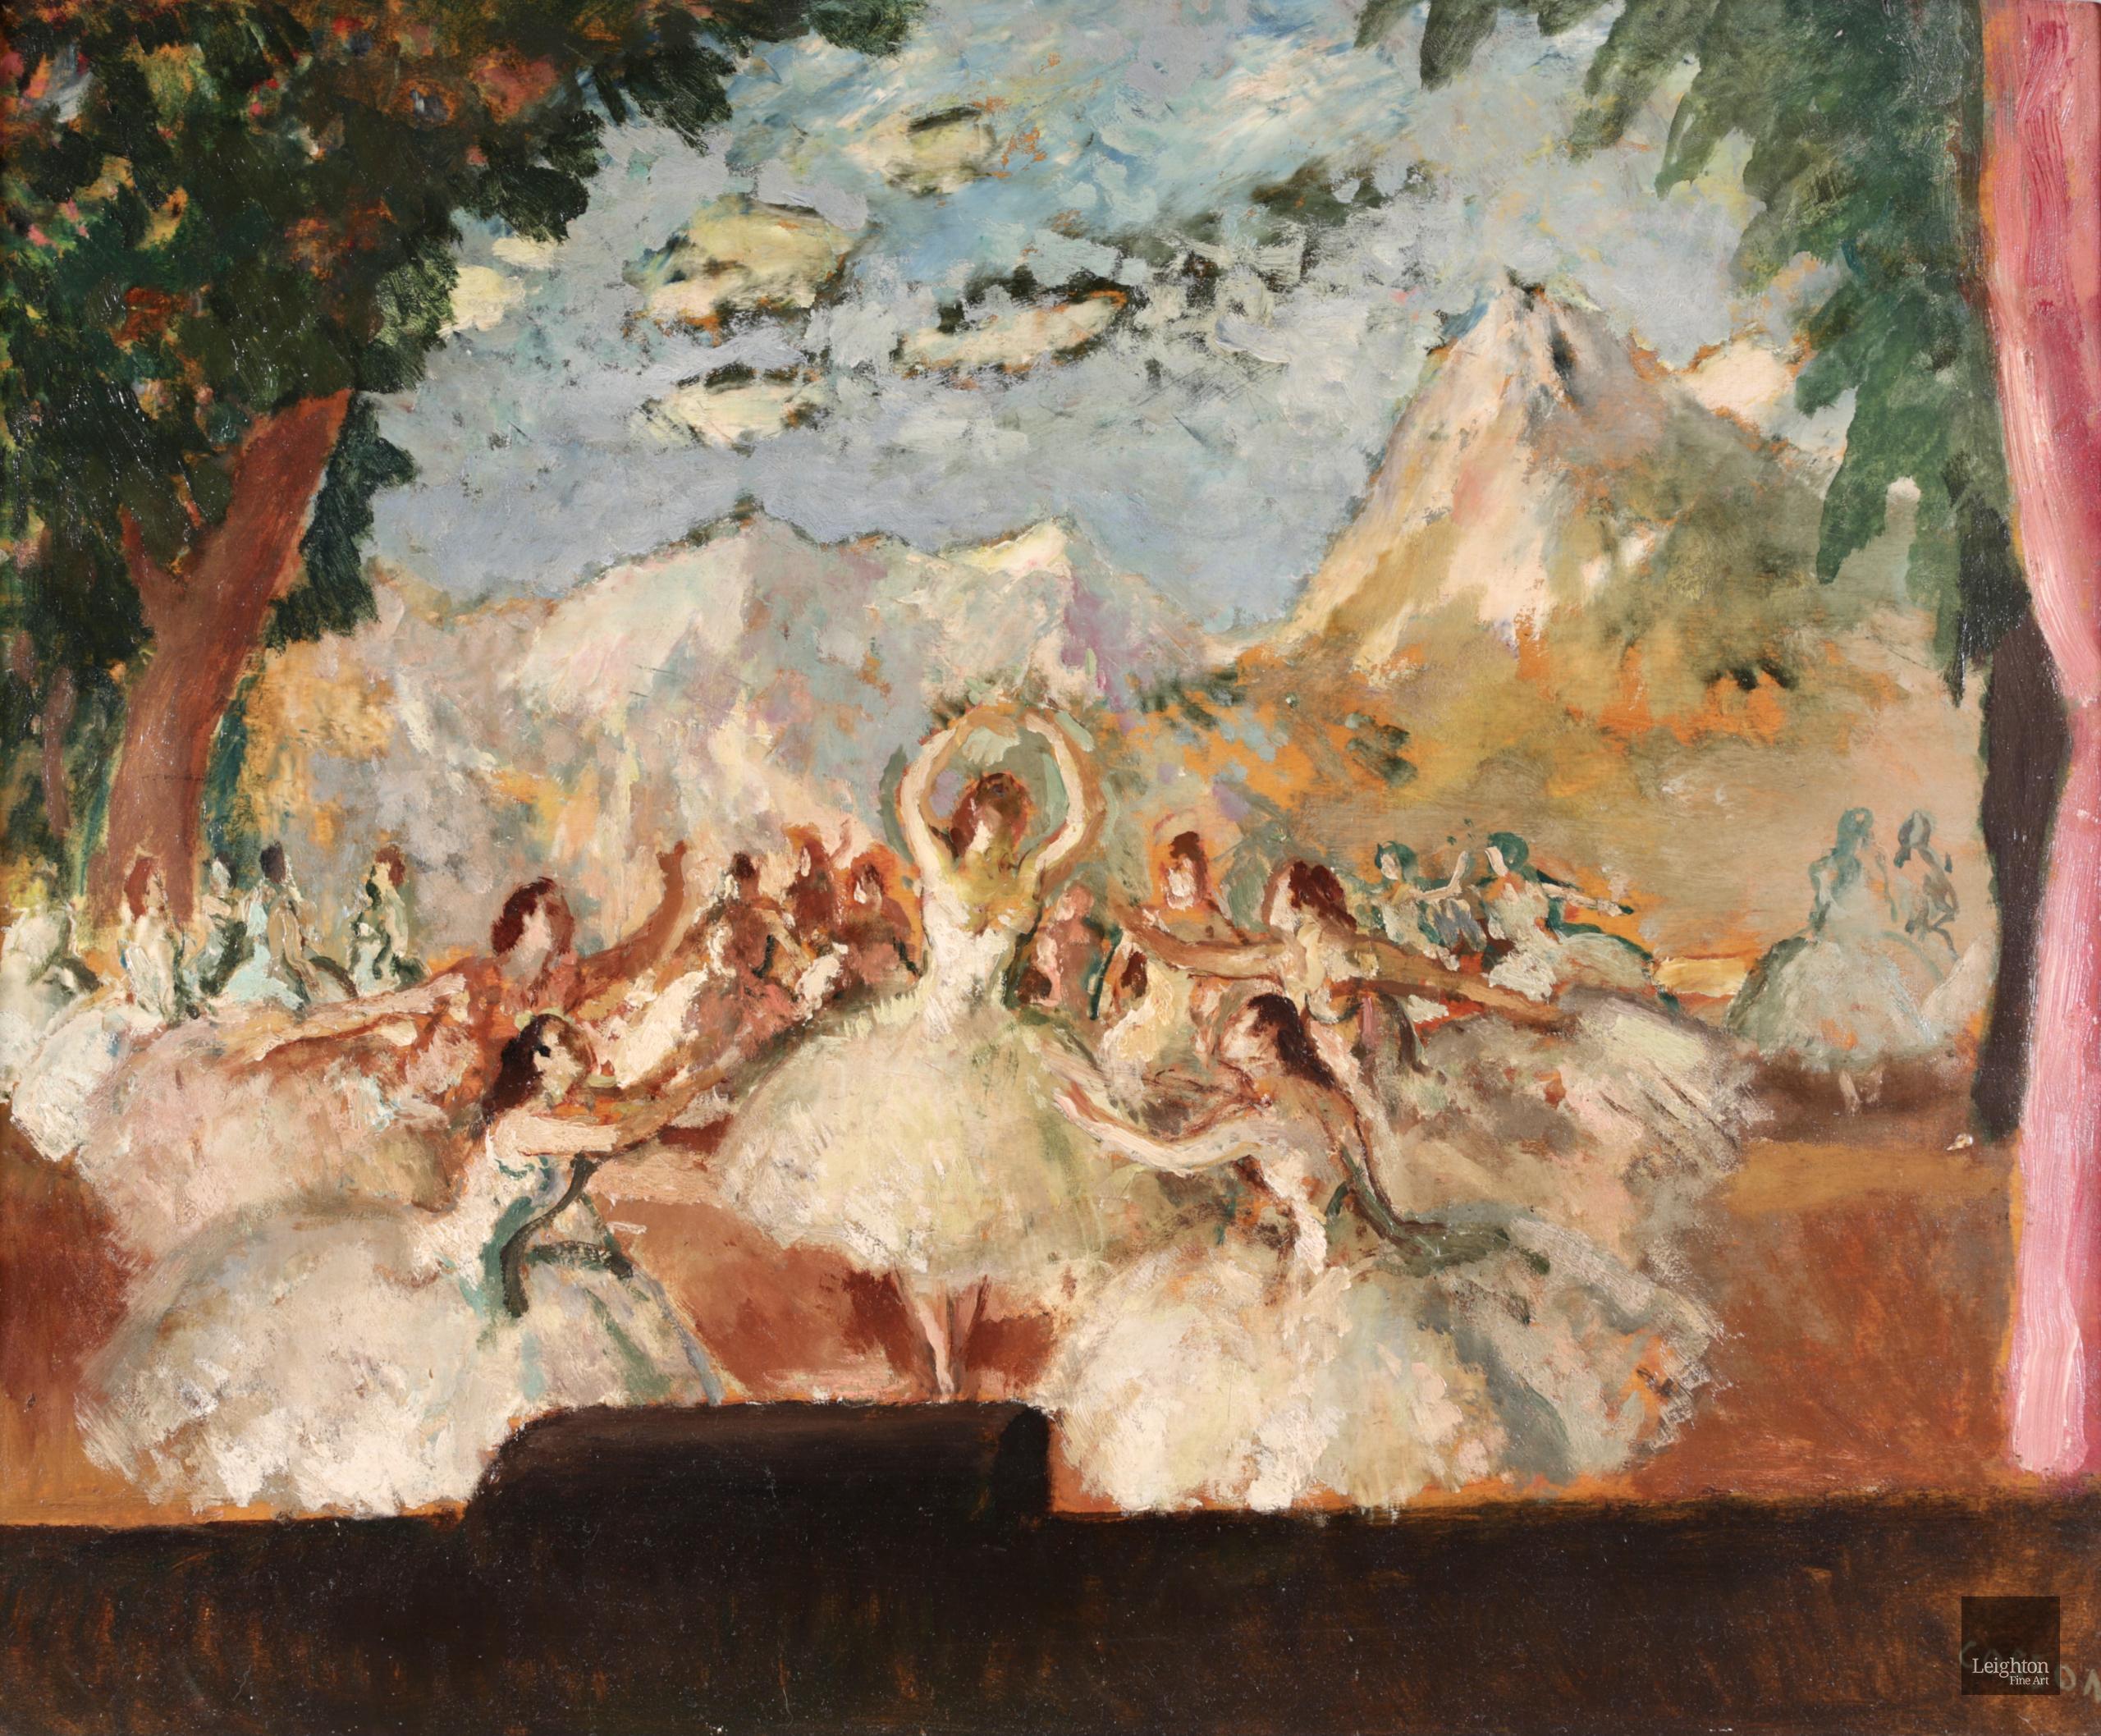 Dancers on a Stage - Post Impressionist Oil, Figures in Interior - Marcel Cosson - Painting by Jean-Louis-Marcel Cosson